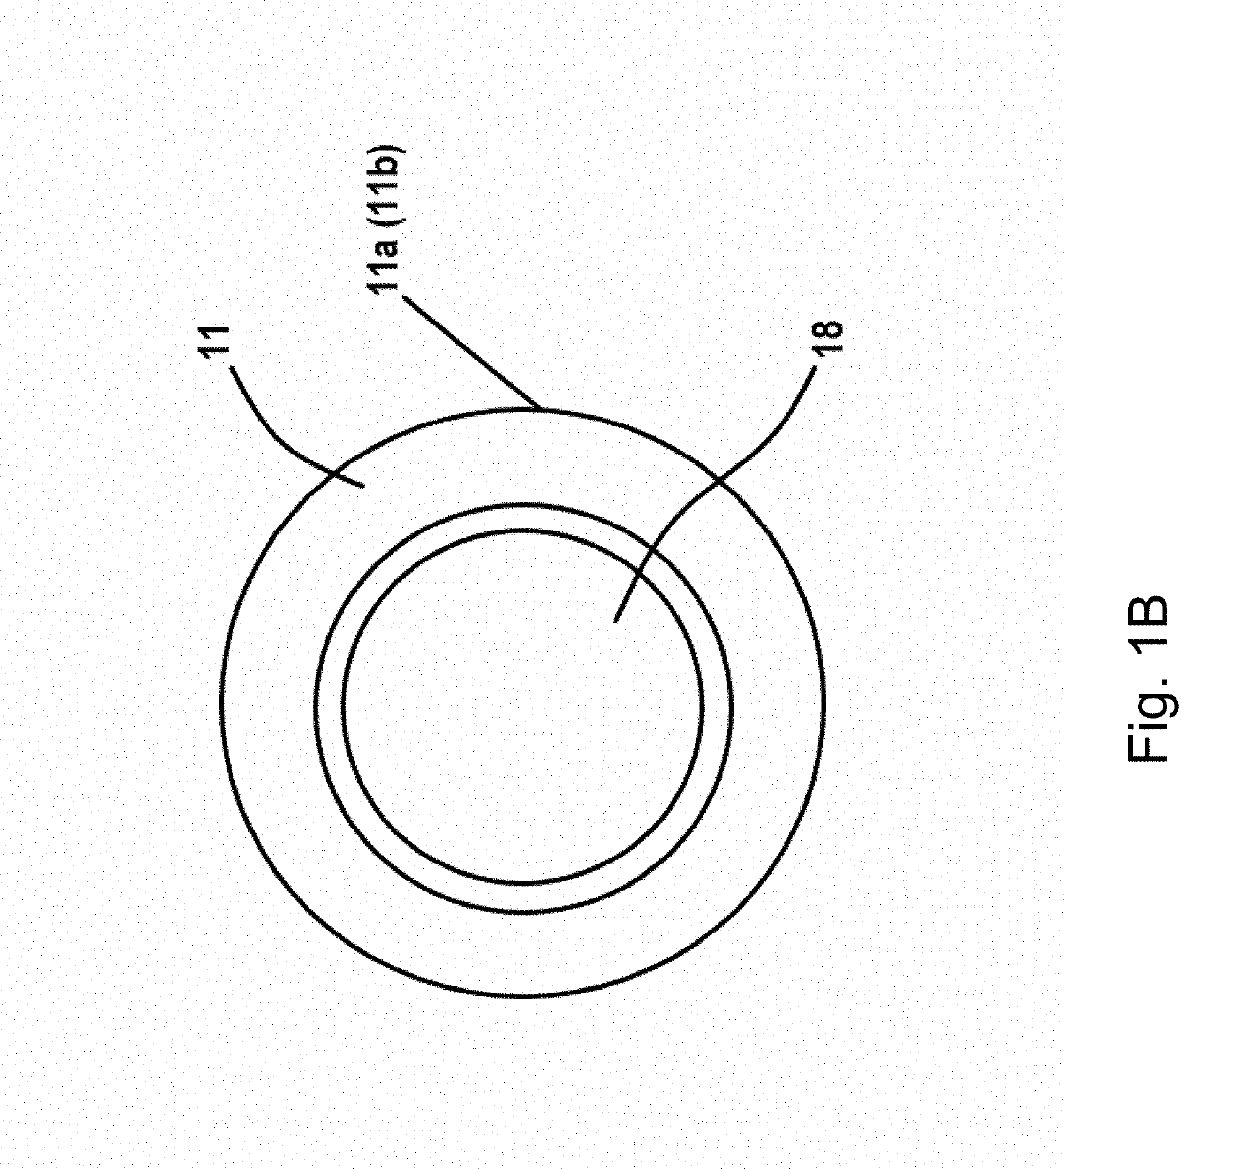 Devices, methods, and systems for the treatment and/or monitoring of damaged tissue